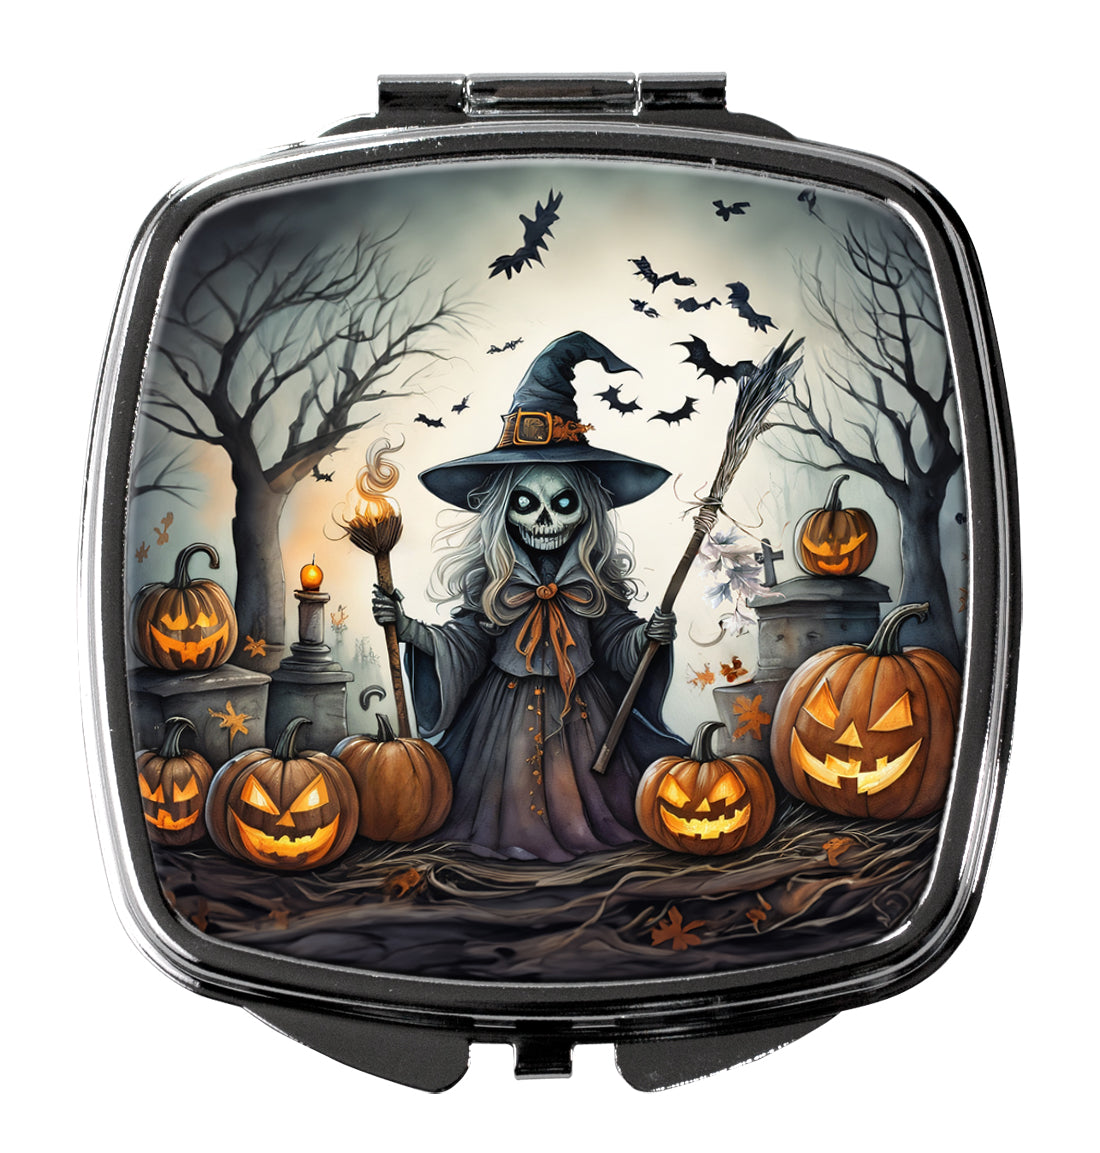 Buy this Witch Spooky Halloween Compact Mirror